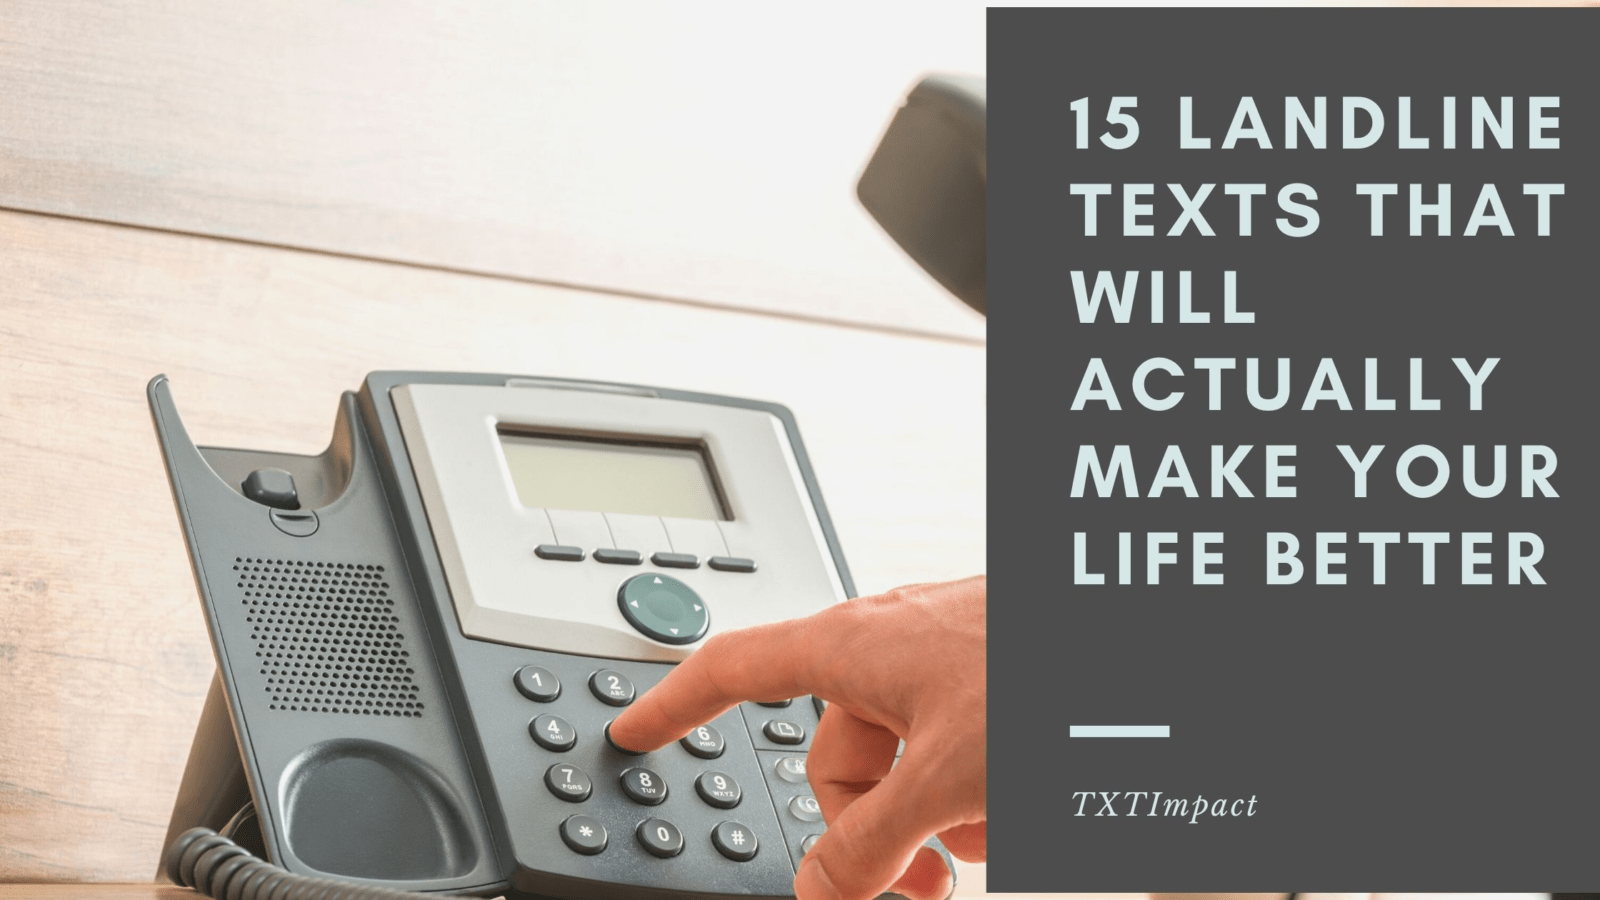 15 landline texts that will actually make your life better